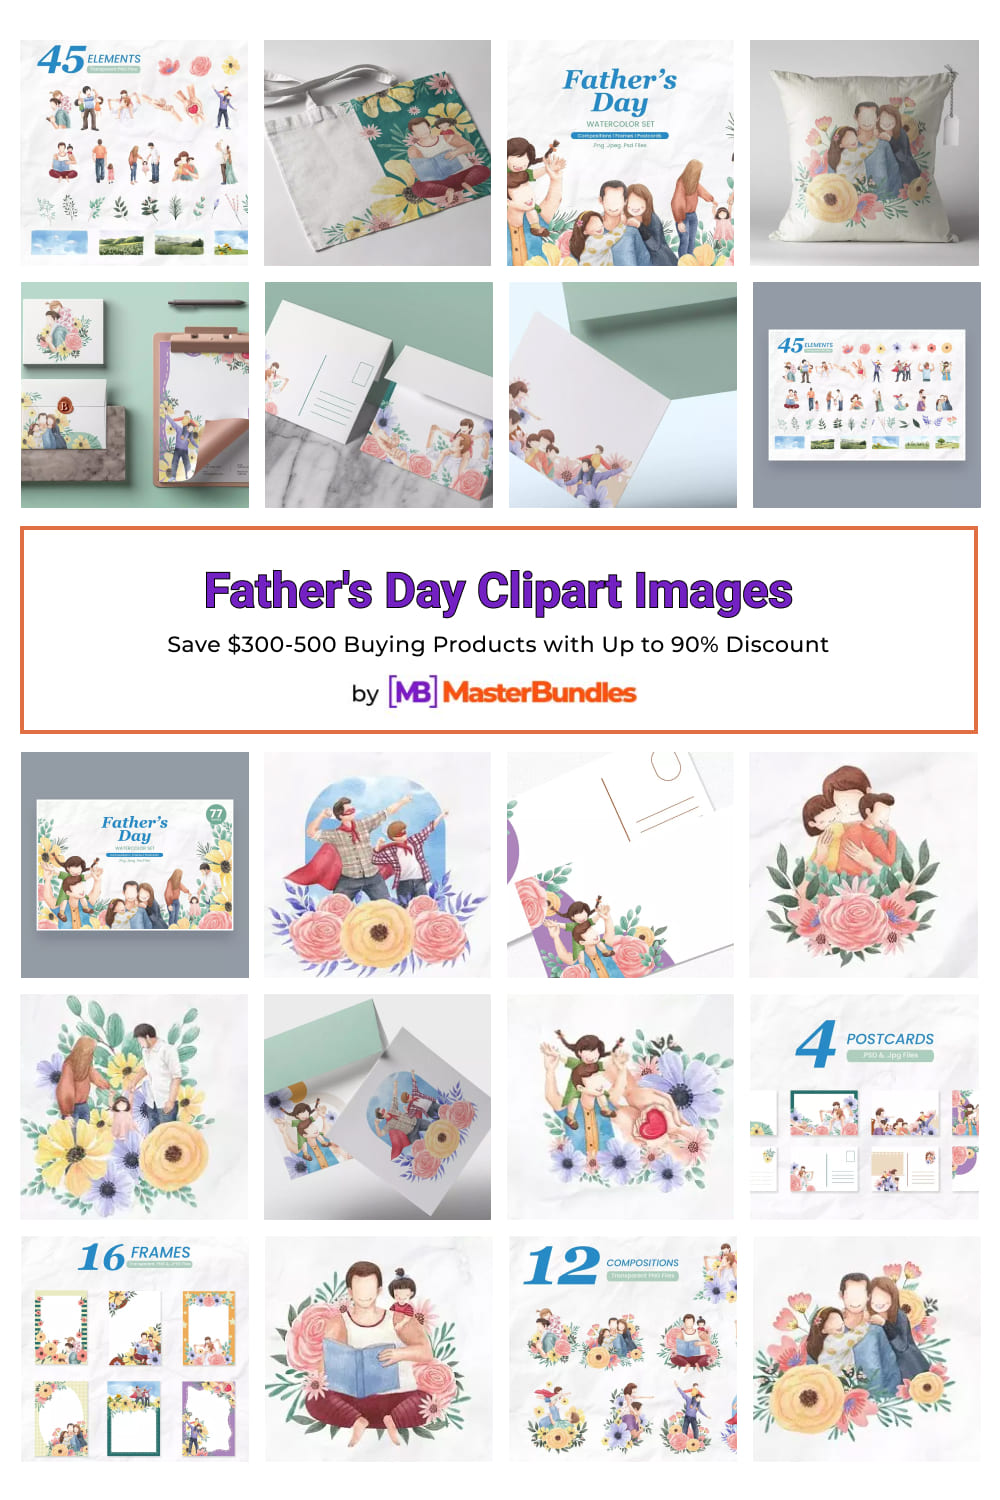 Father's Day Clipart Images Pinterest image.